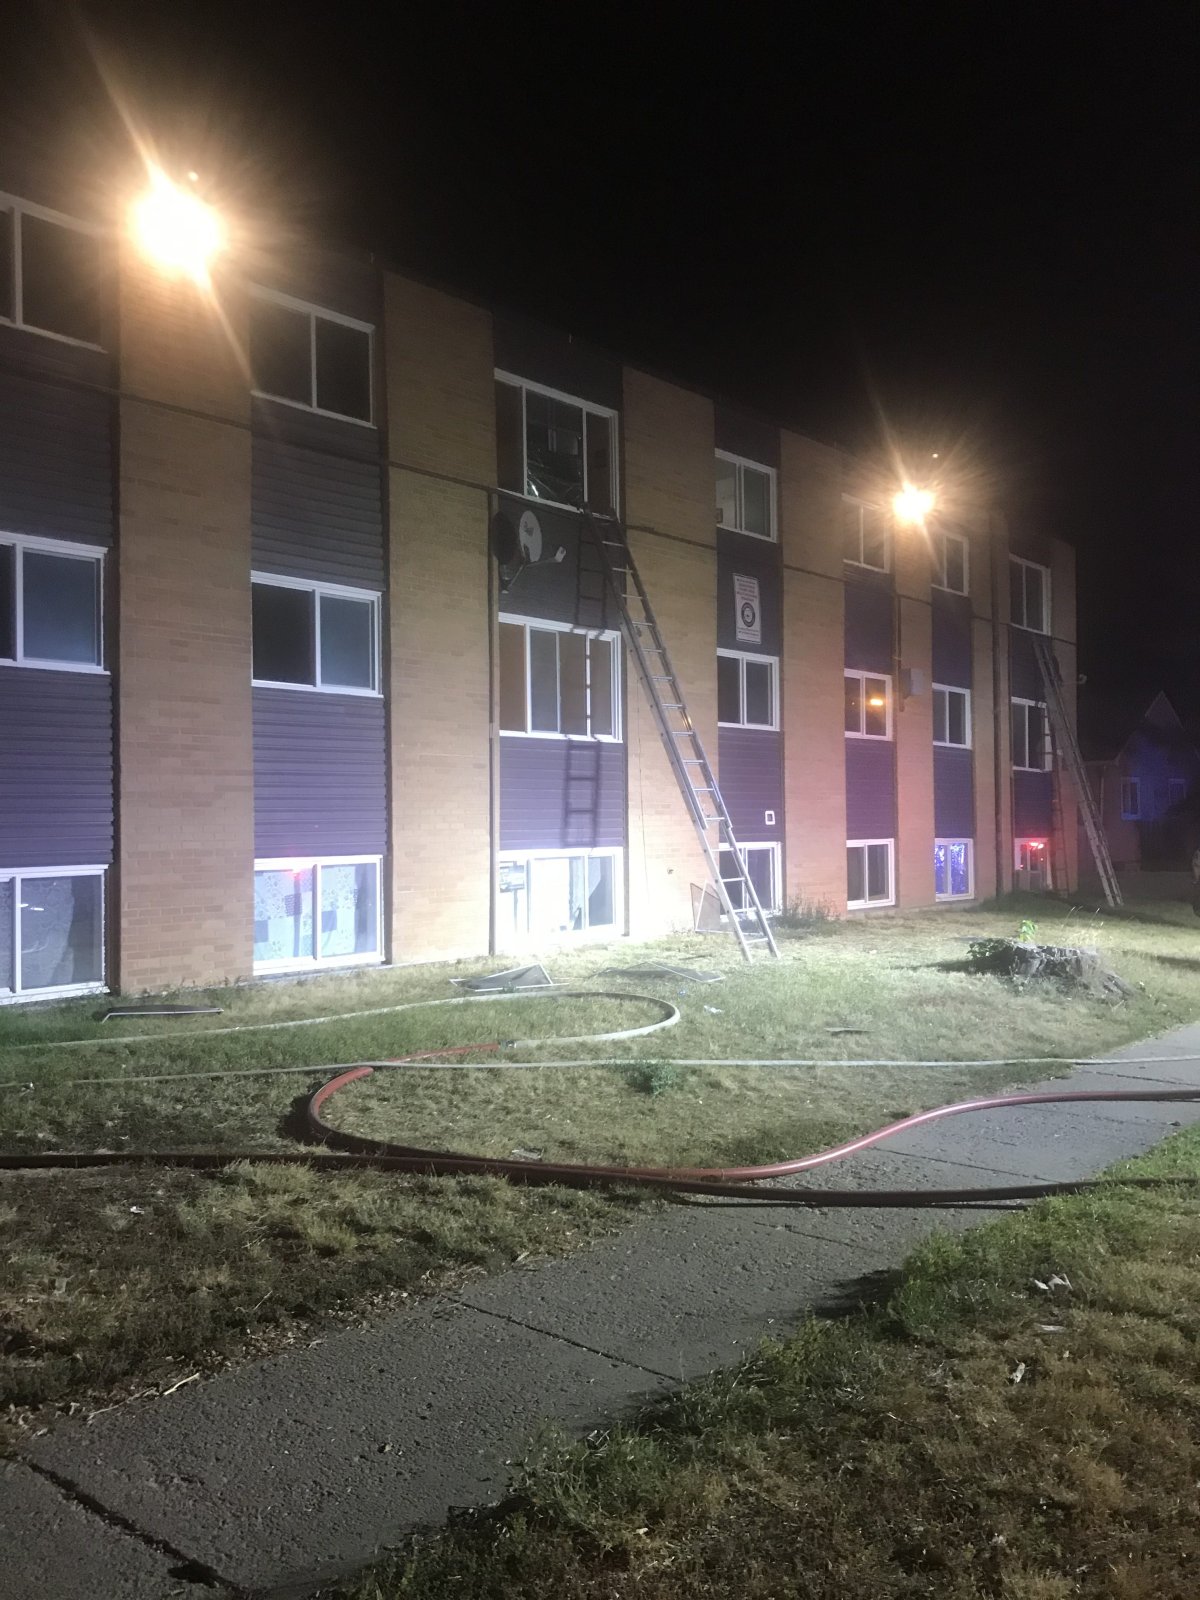 The Saskatoon Fire Department rescued three people from an apartment building on Friday night. Fire investigators have not yet determined the cause.